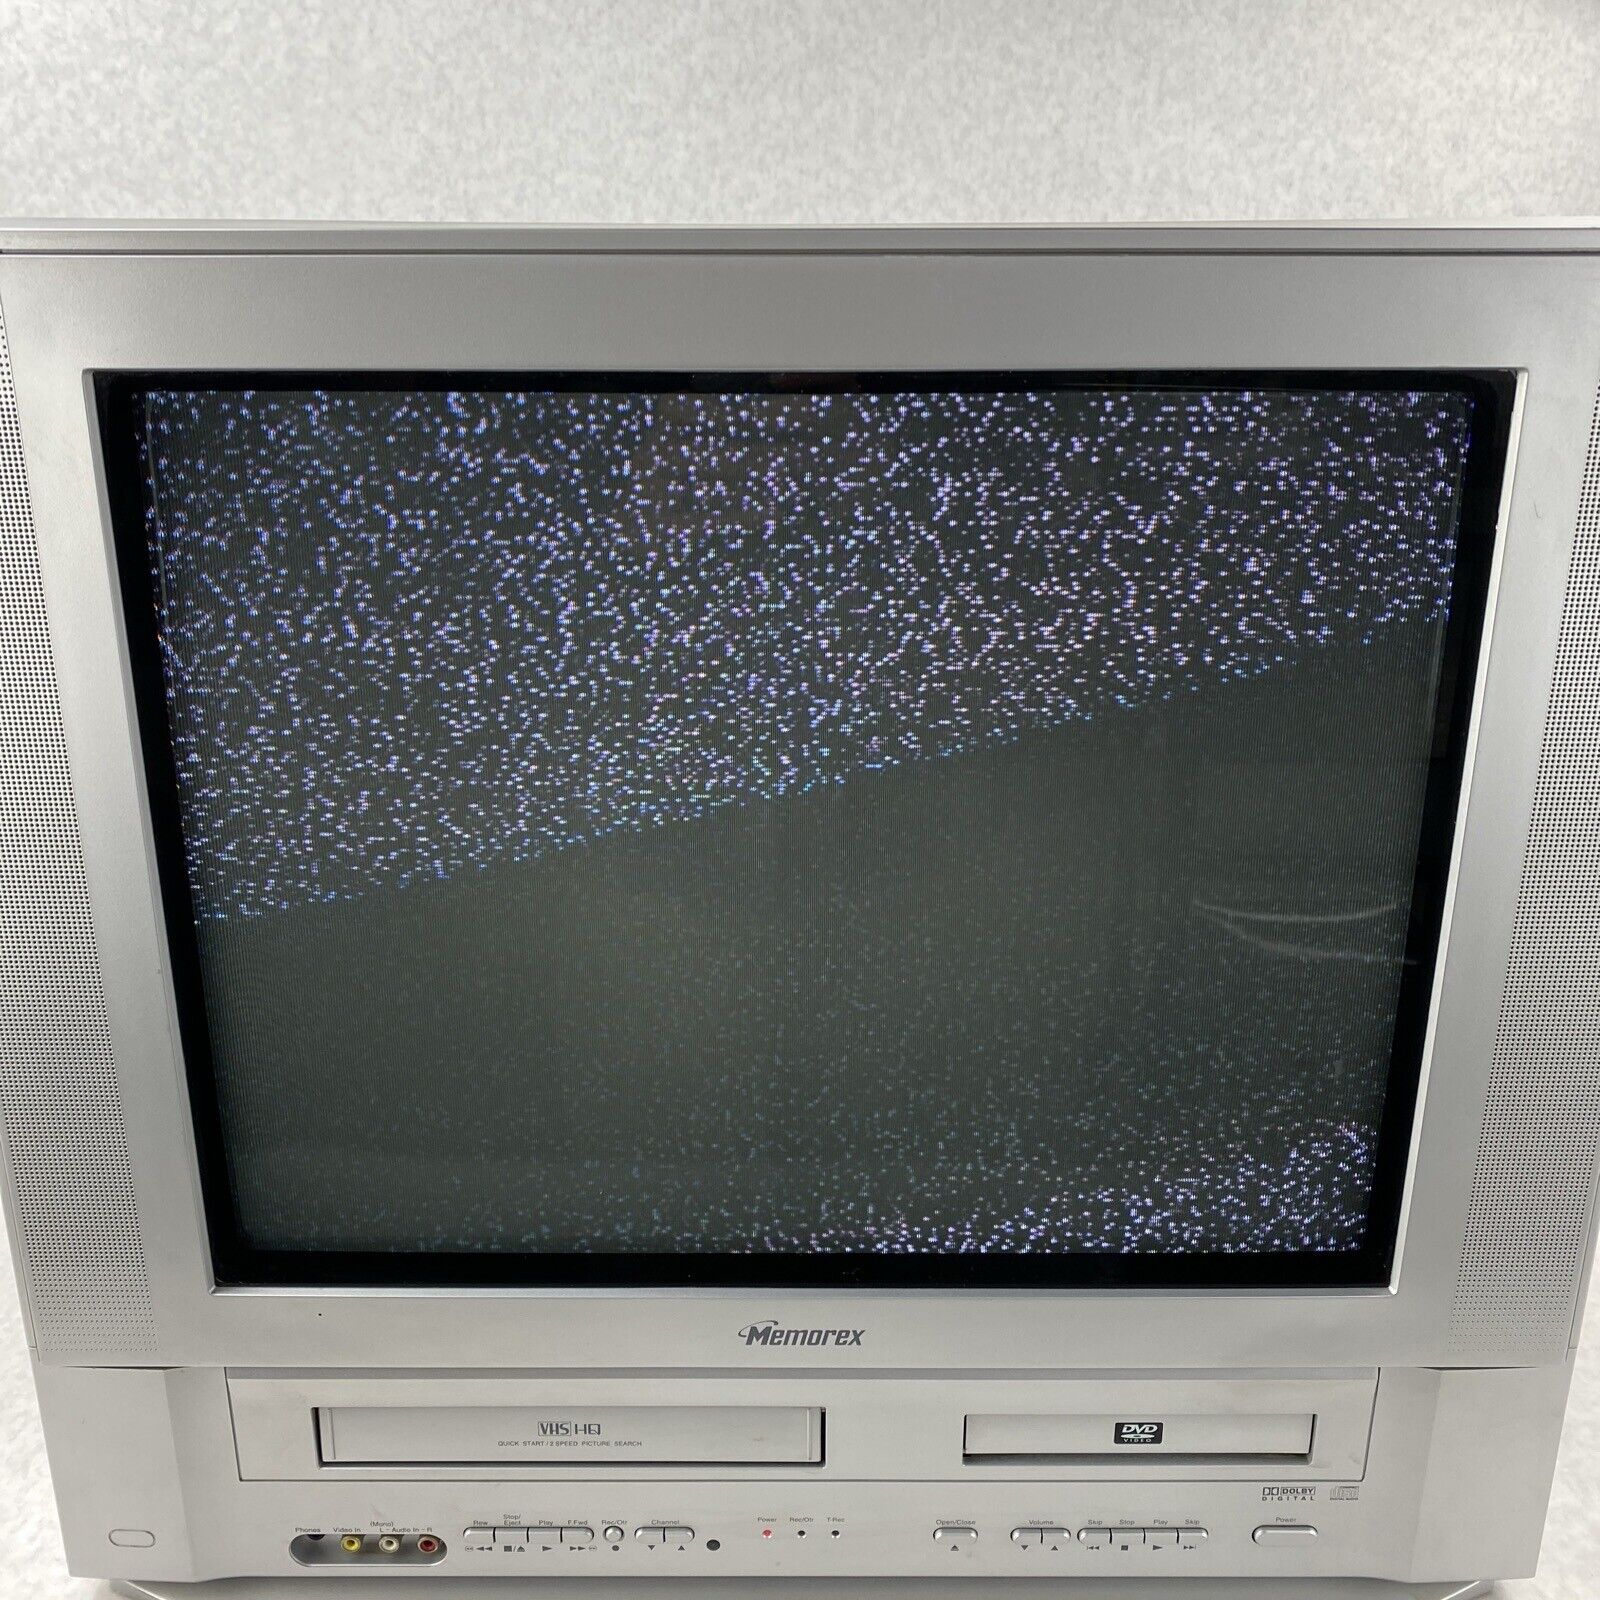 Memorex 20" MVDT2002B TV VCR DVD Combo 110W Retro Gaming BAD VHS PICTURE